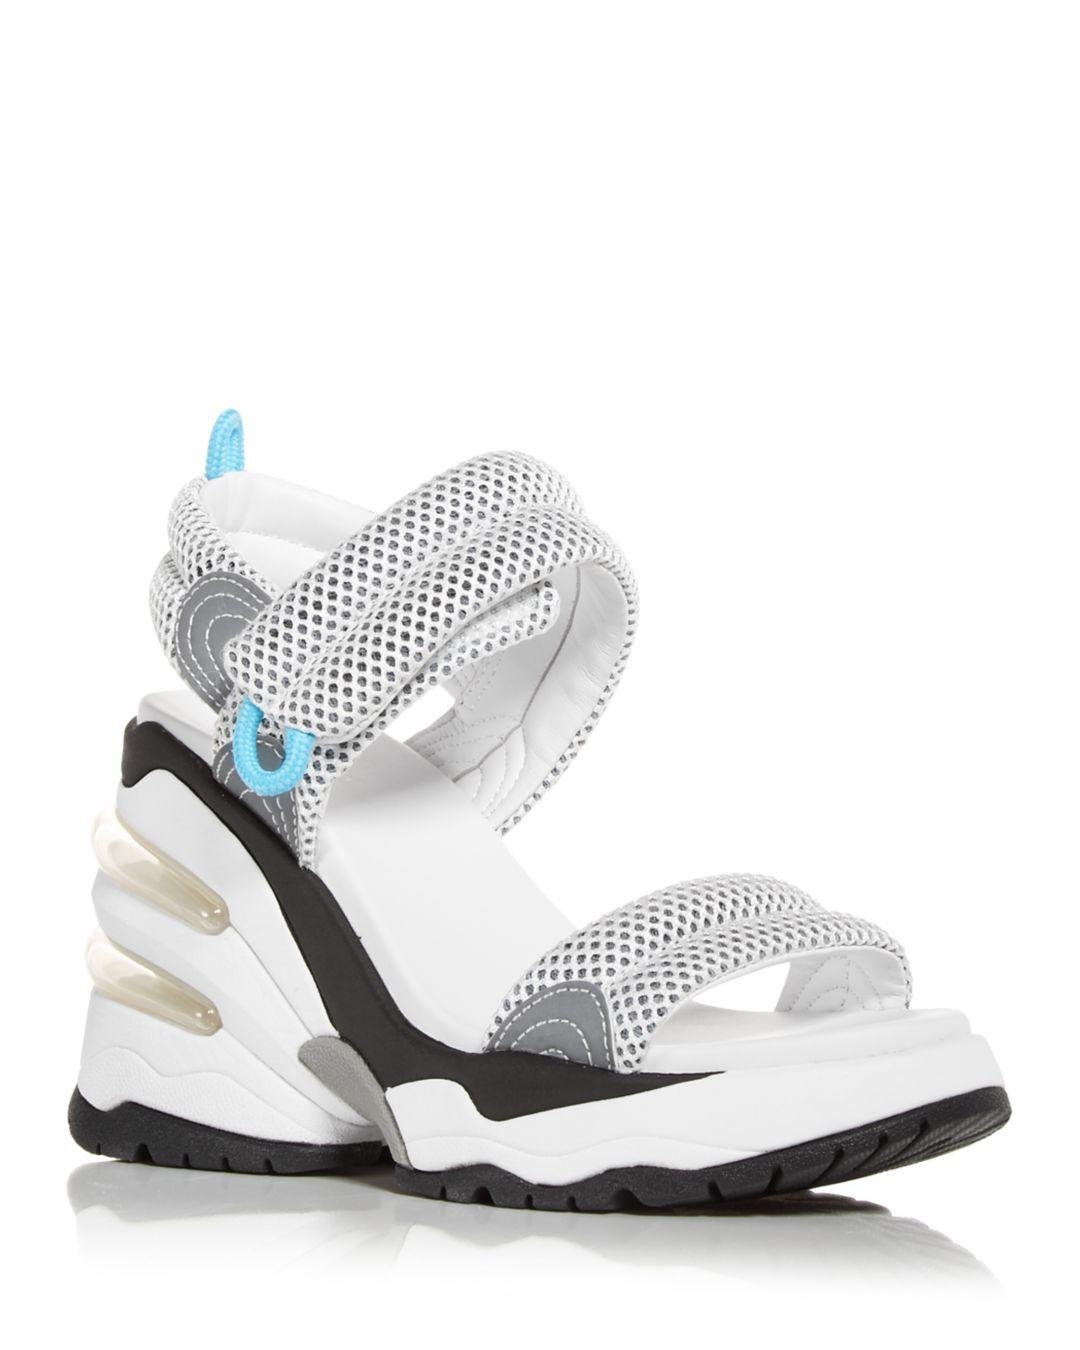 Ash Synthetic Cosmos Wedge Platform Sneaker Sandals in White/Silver (White)  | Lyst